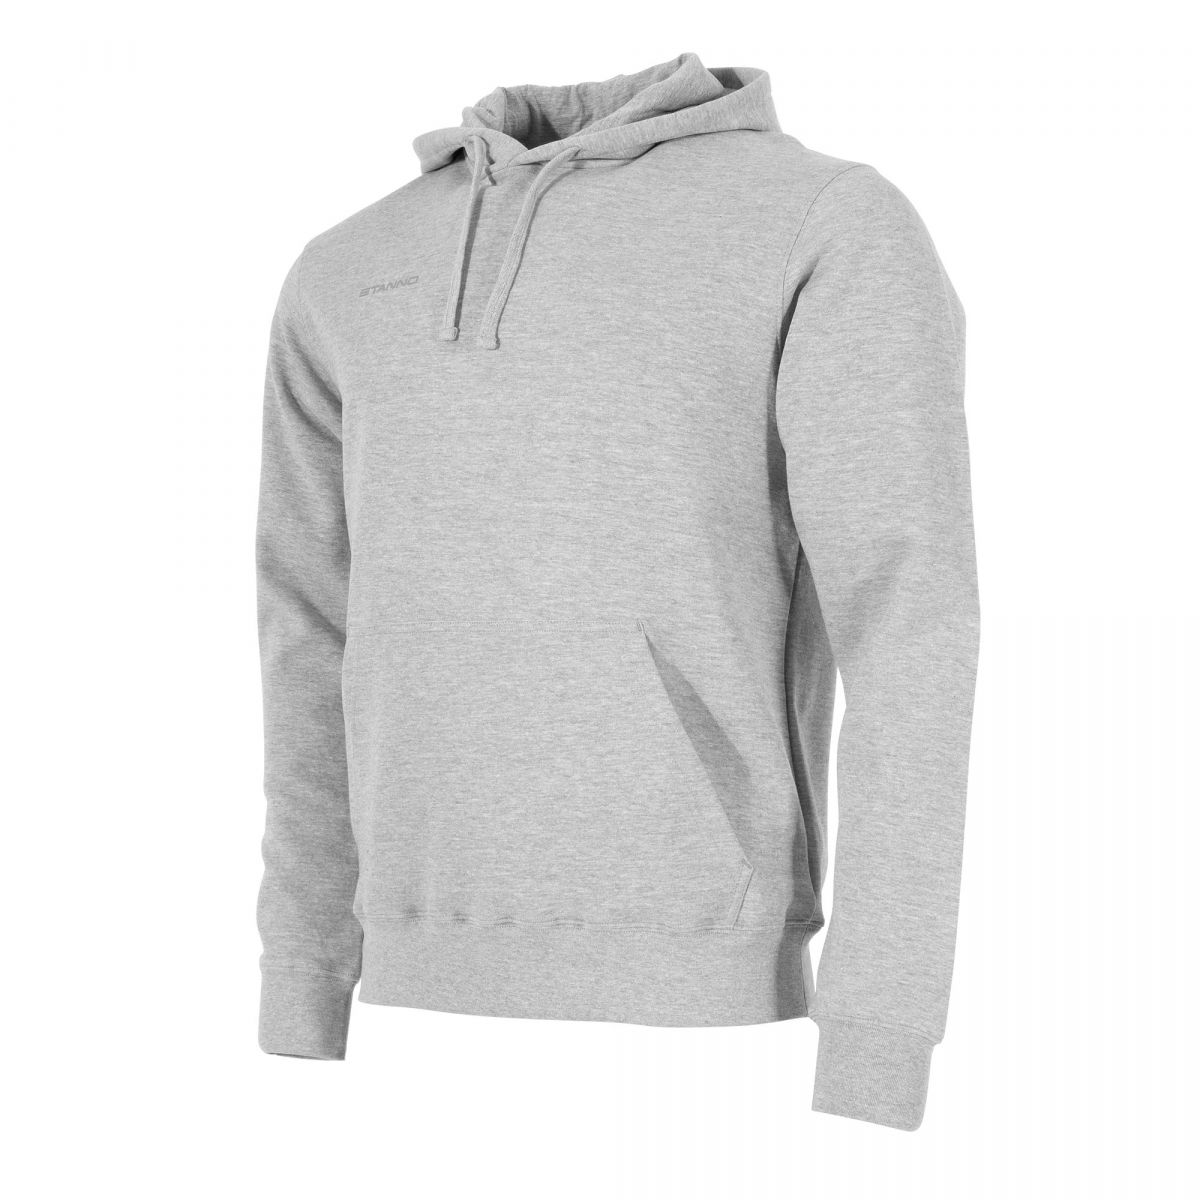 Shop & Support Base Hooded Sweater